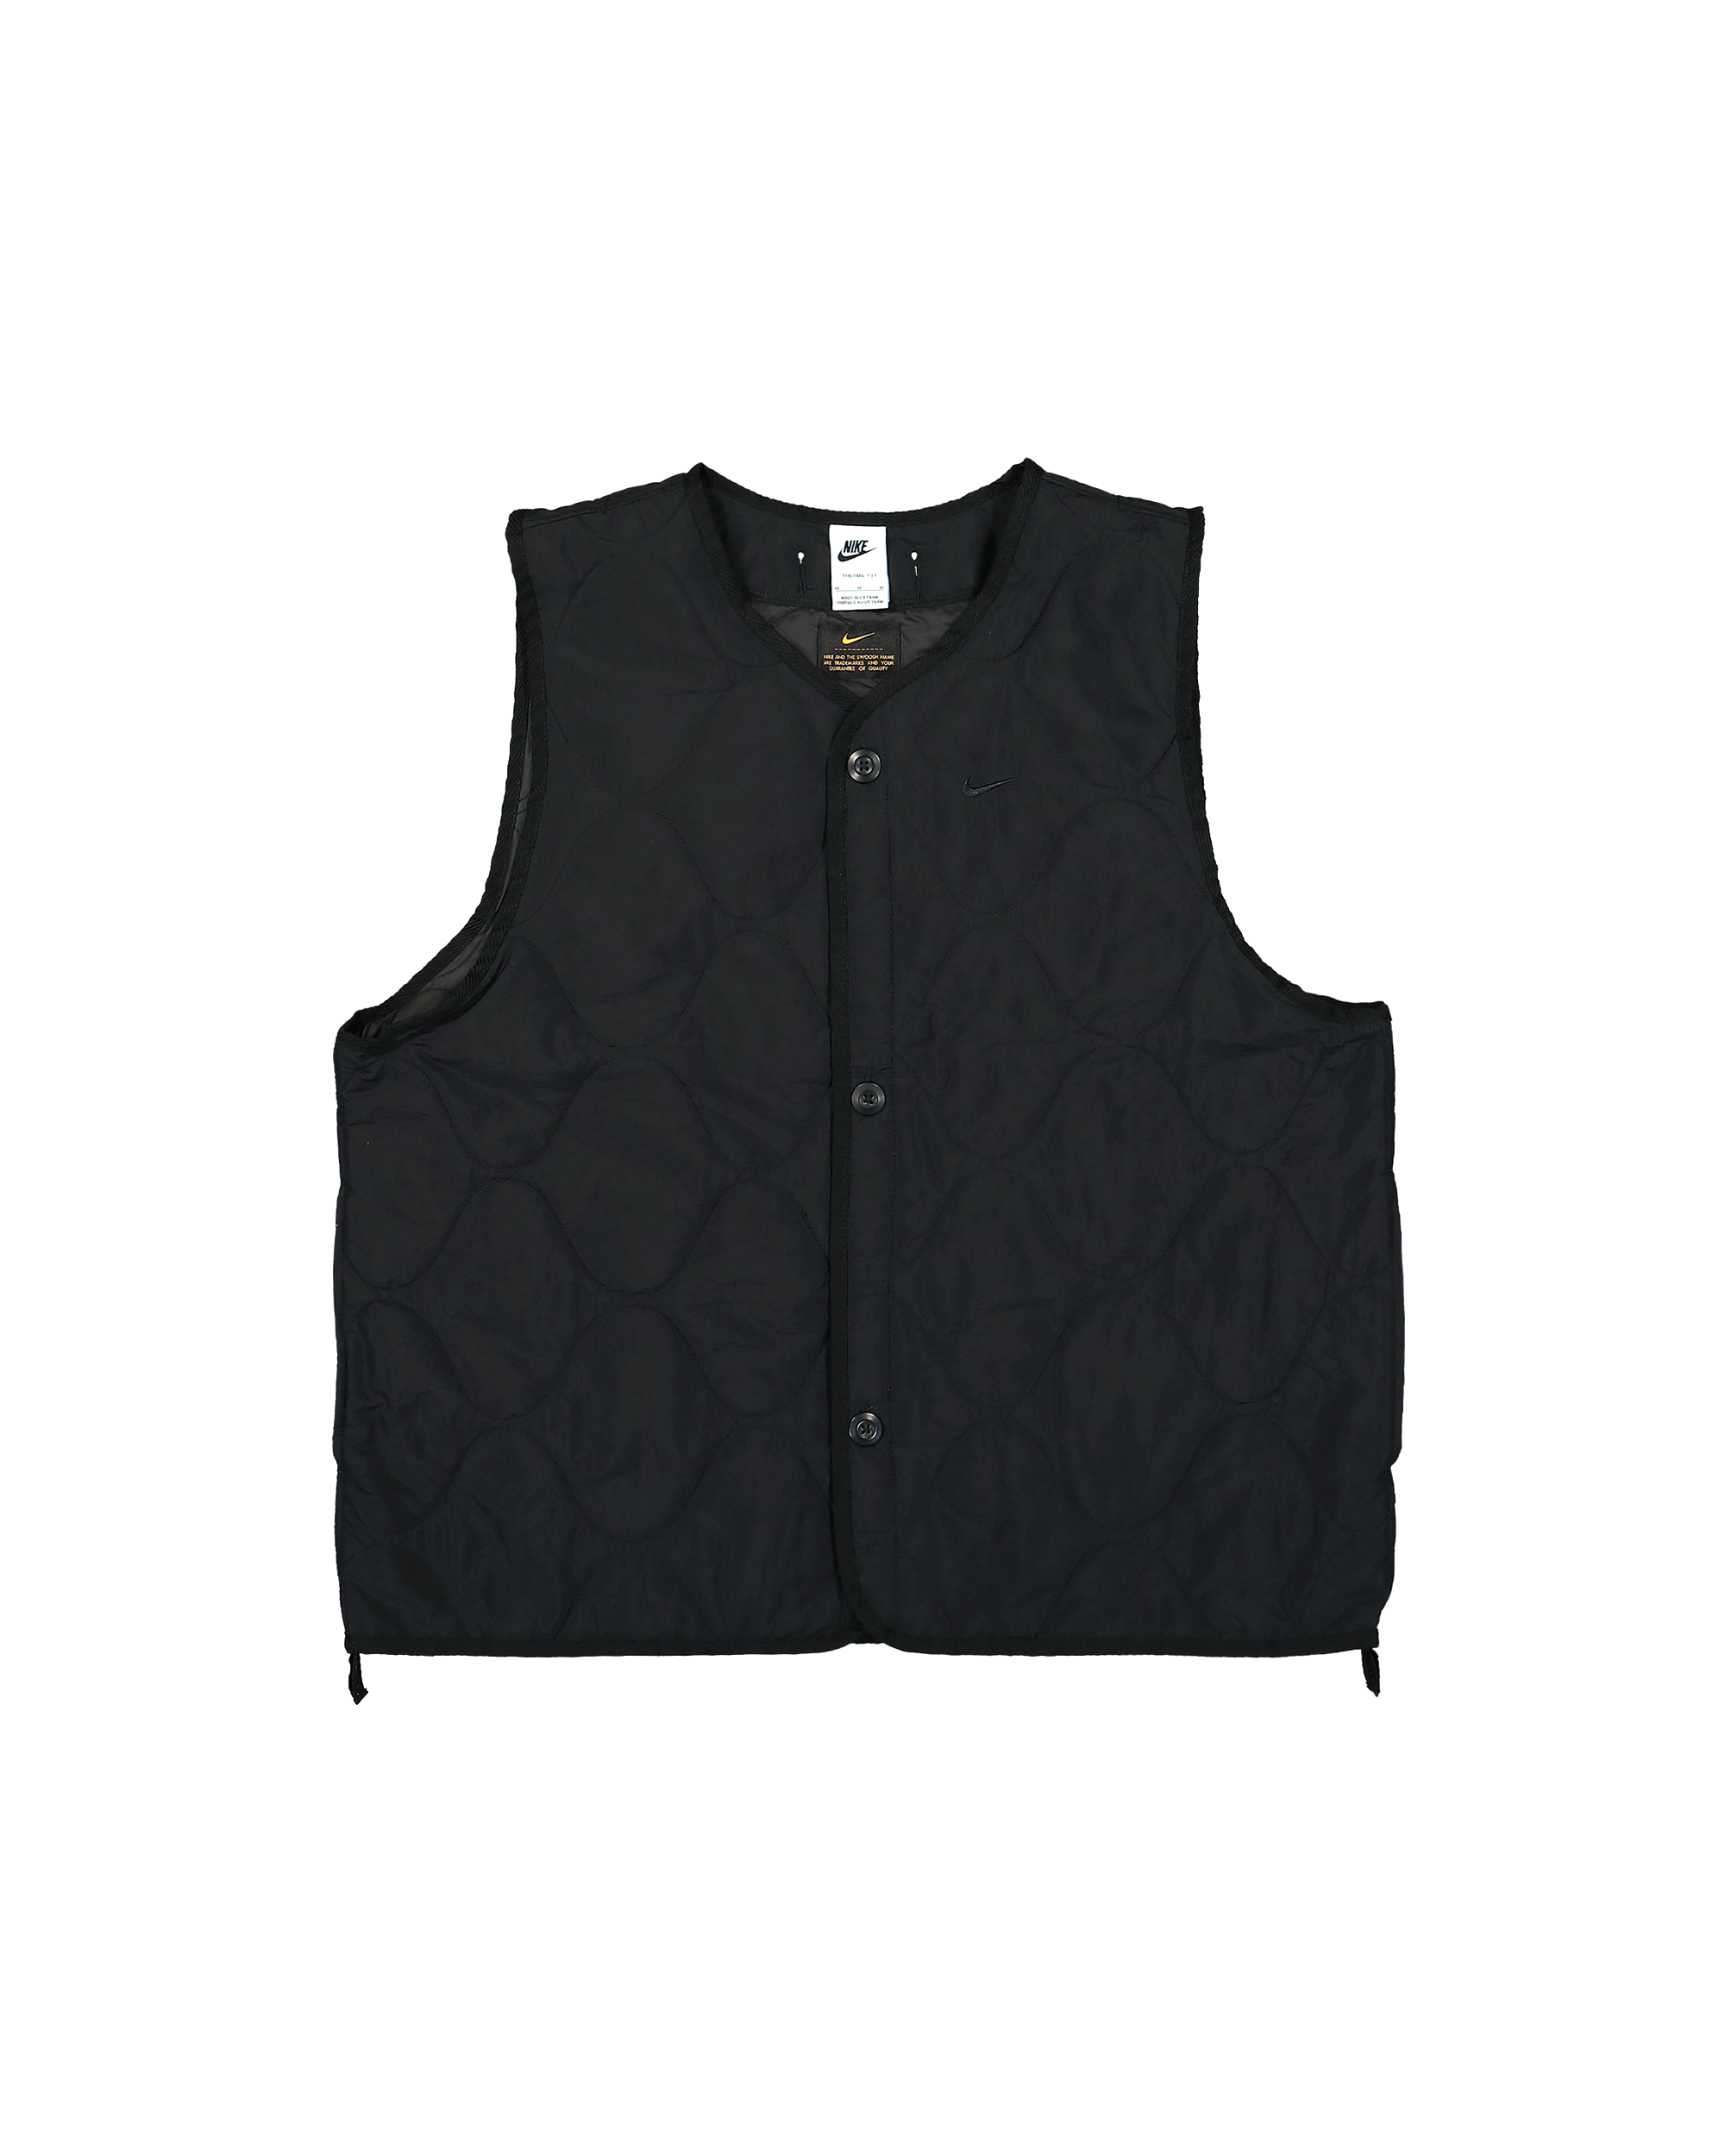 Woven Insulated Military Vest - Black / Black